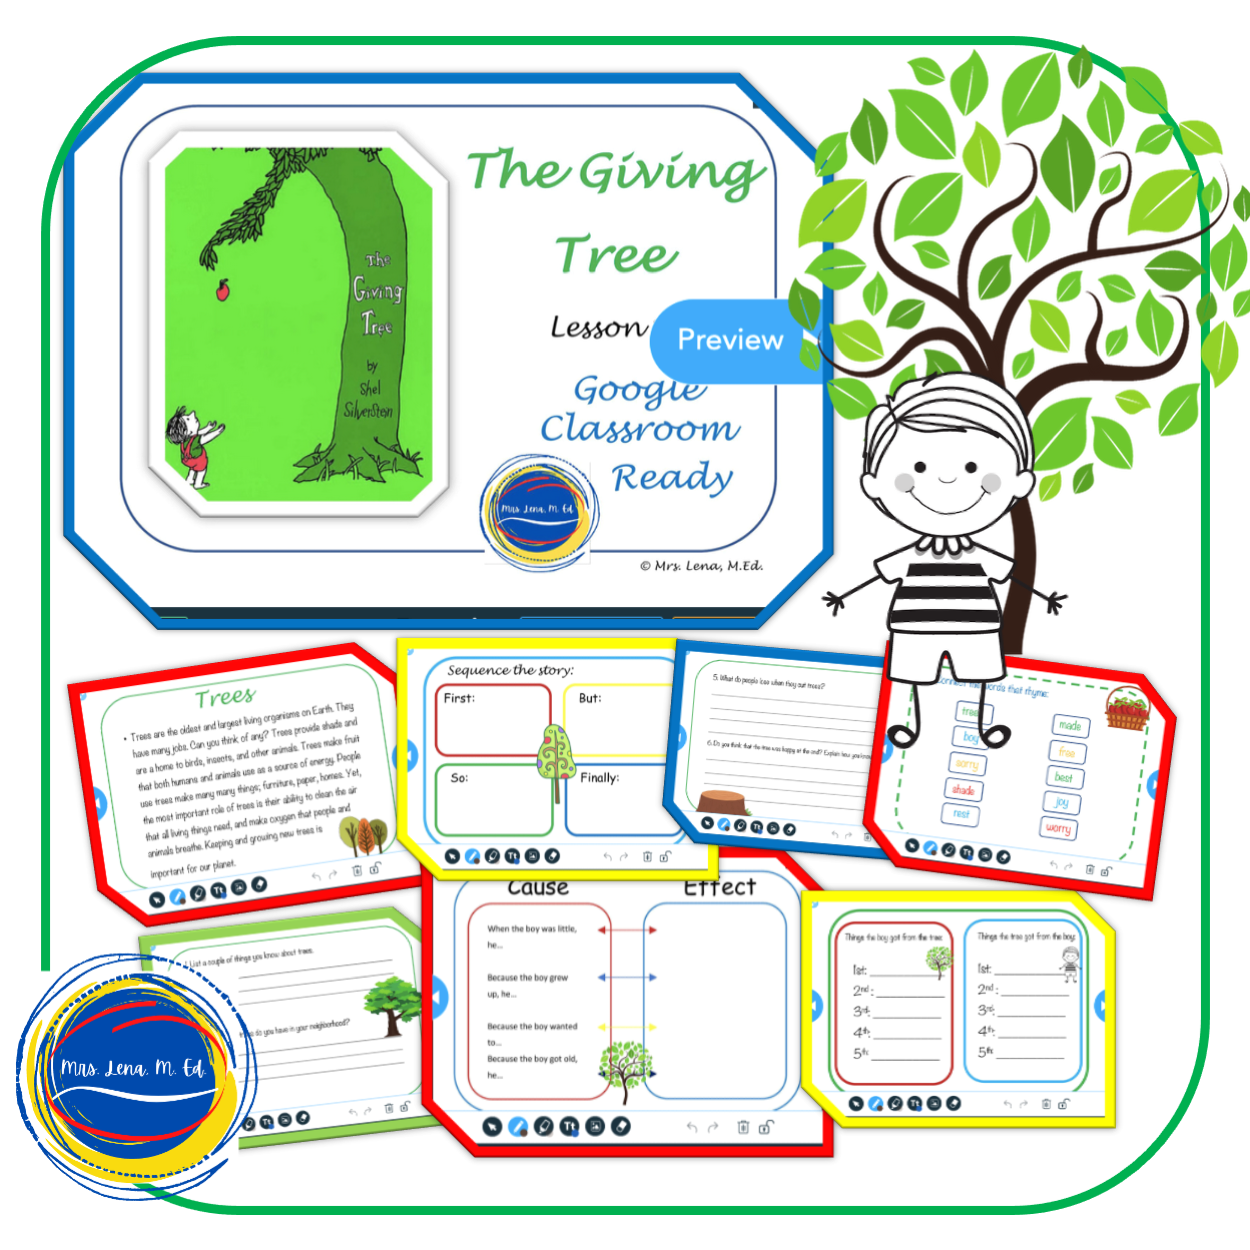 The Giving Tree by Silverstein Lesson on Responsible Use of Natural Resources